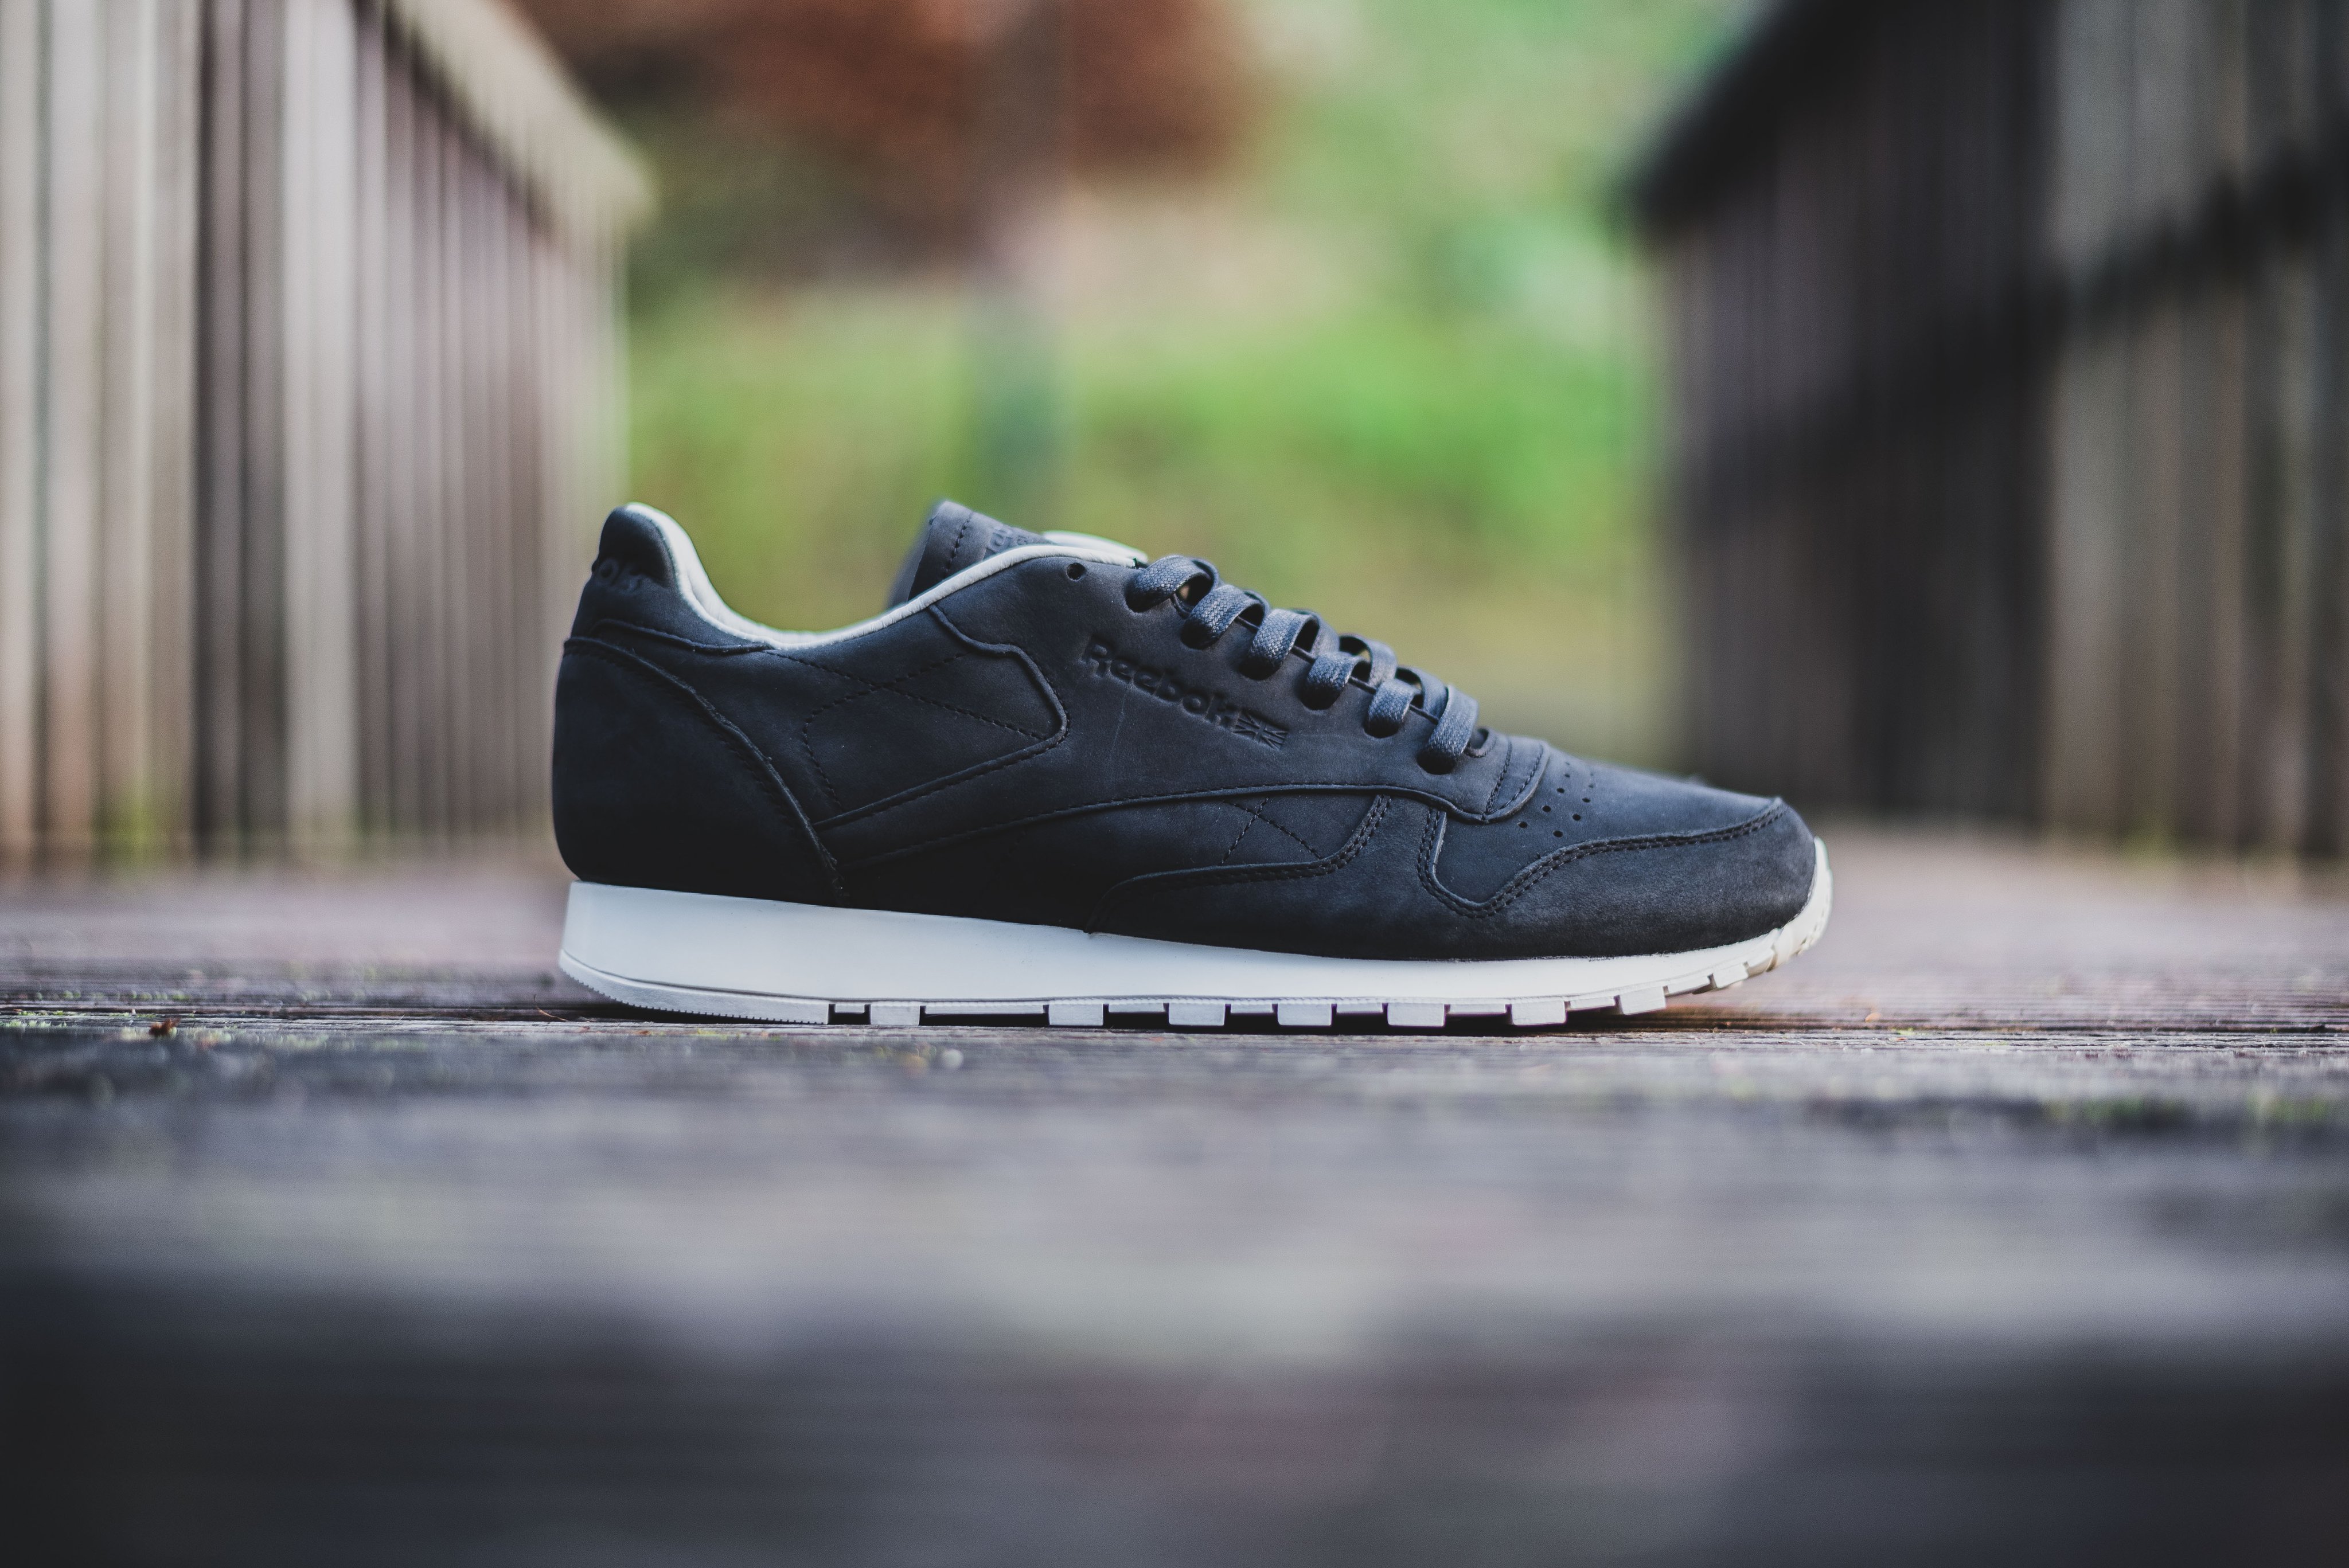 on Twitter: Classic Leather Lux PW in black is available to buy ONLINE now! #reebok #hanon https://t.co/pUpzhSVqVu https://t.co/0i6jc7NbbE" / Twitter